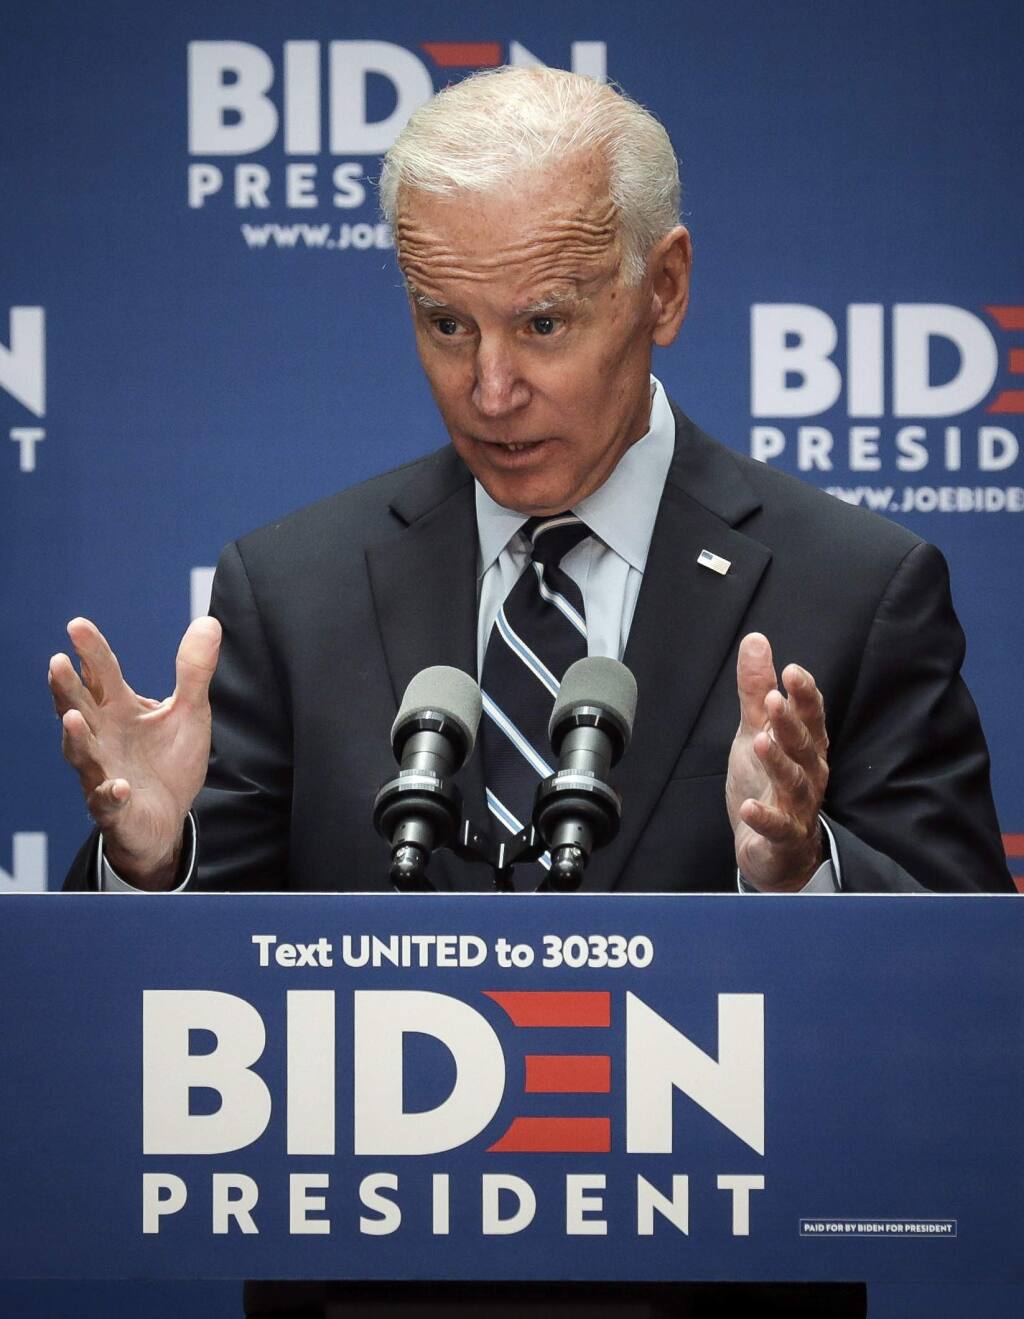 Democratic presidential candidate former Vice President Joe Biden speaks about foreign policy at The Graduate Center at CUNY, Thursday July 11, 2019, in New York. (AP Photo/Bebeto Matthews)